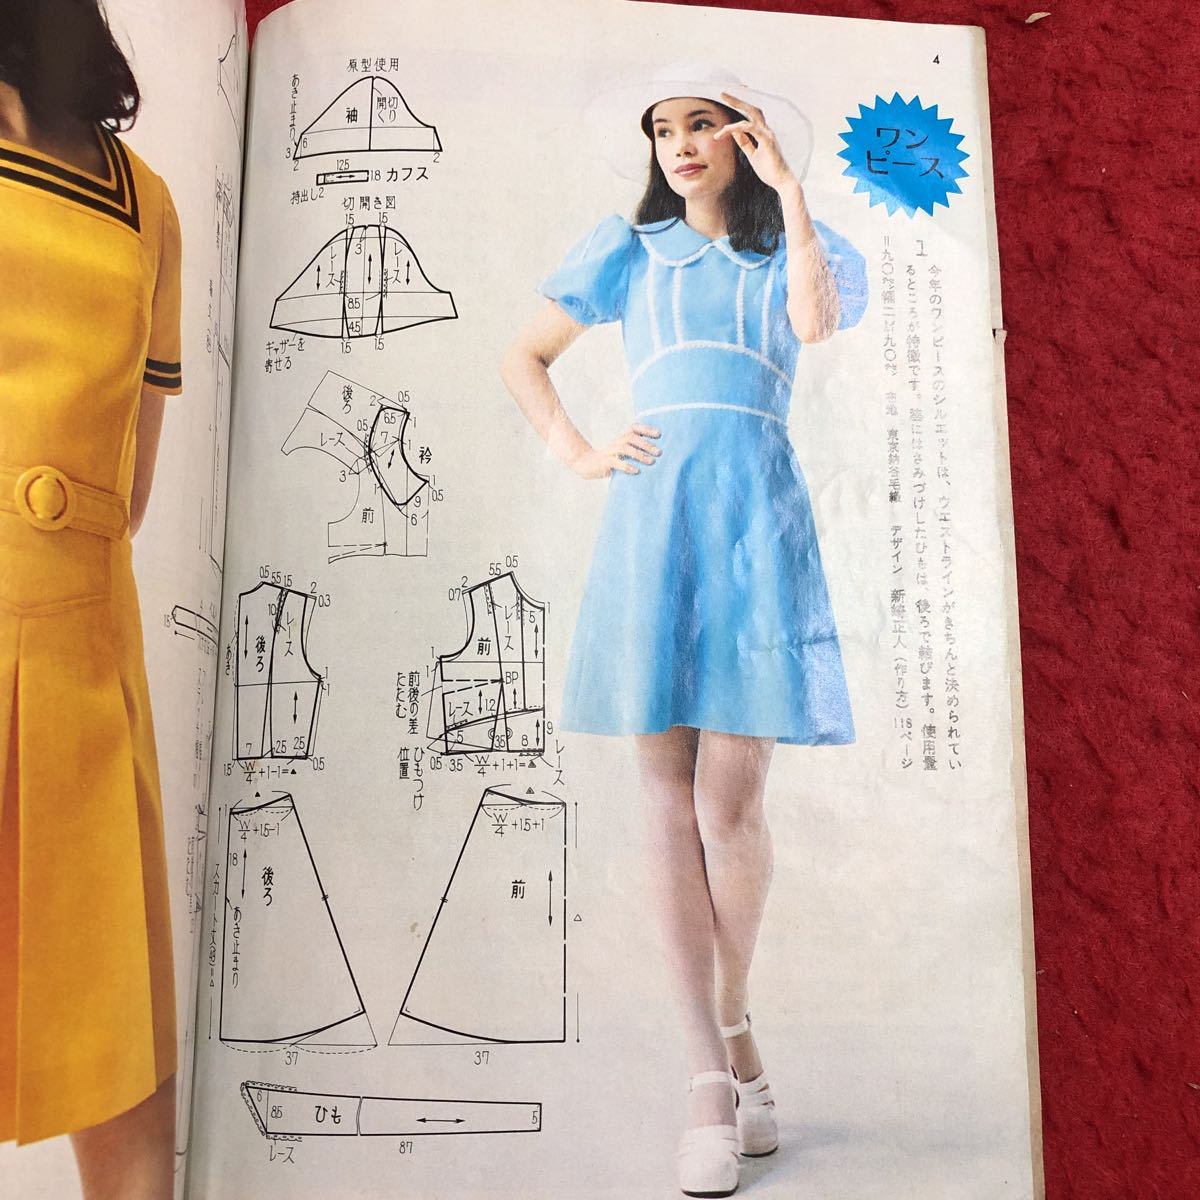 M6e-100 equipment .6 month number appendix cutting person .. person convenience . Showa era 47 year 6 month 1 day issue culture publish company dressmaking handicrafts magazine One-piece shirt skirt separe-tsu